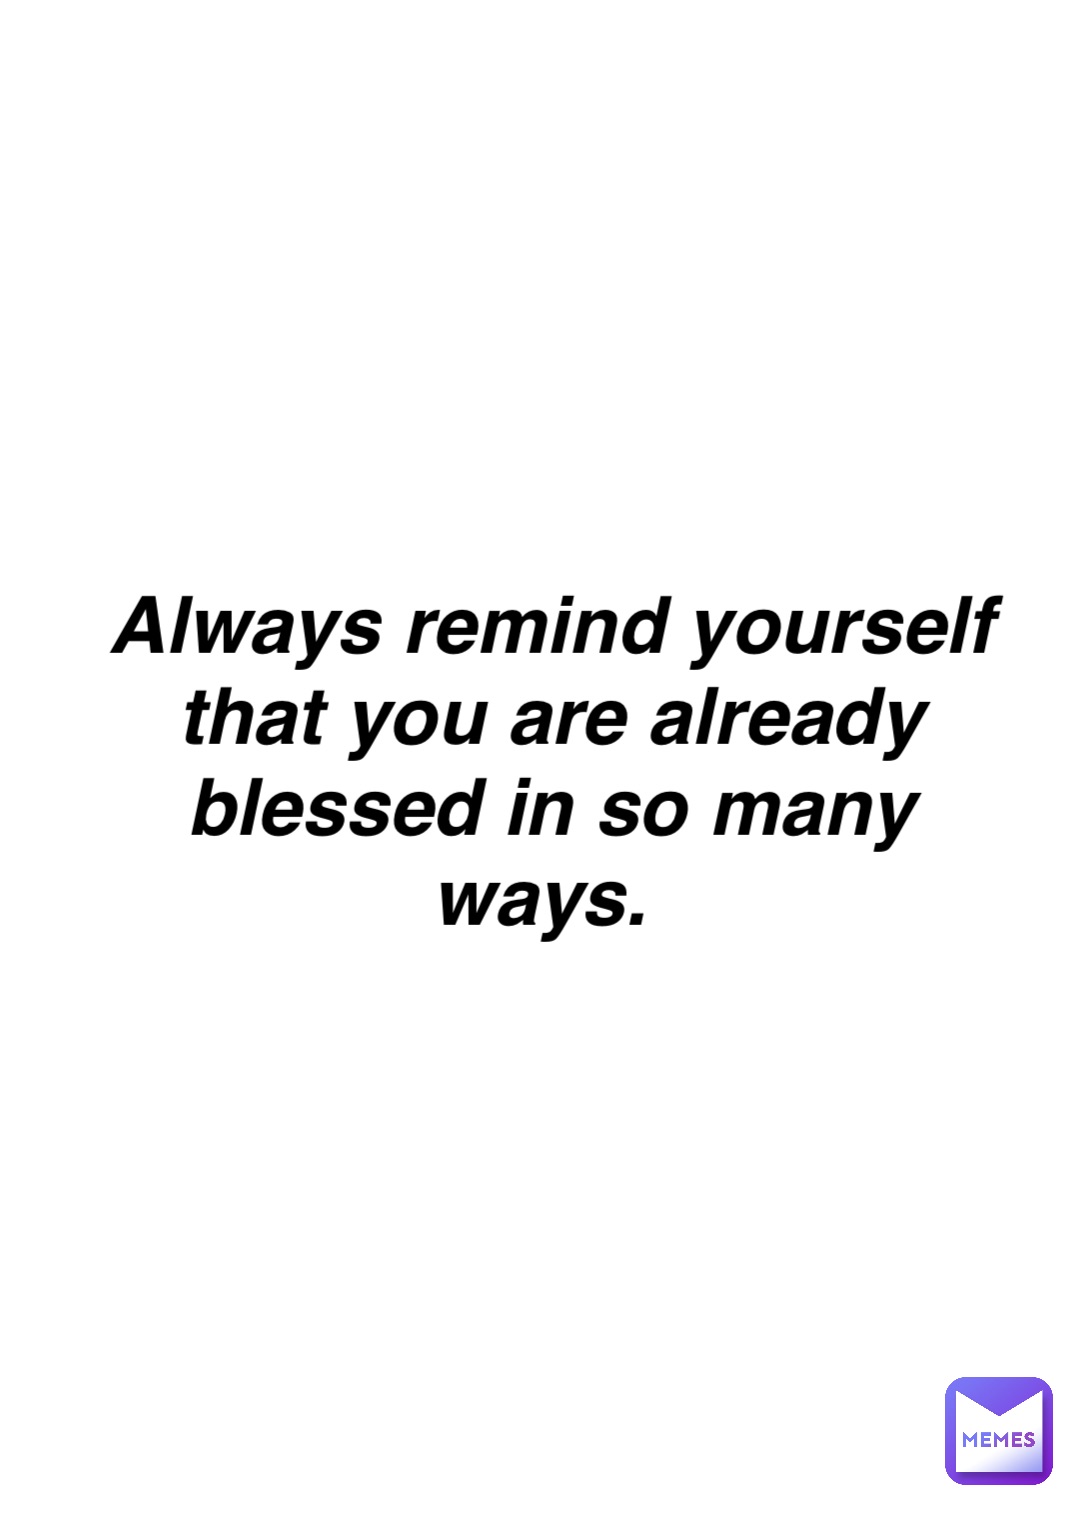 Double tap to edit Always remind yourself that you are already blessed in so many ways.